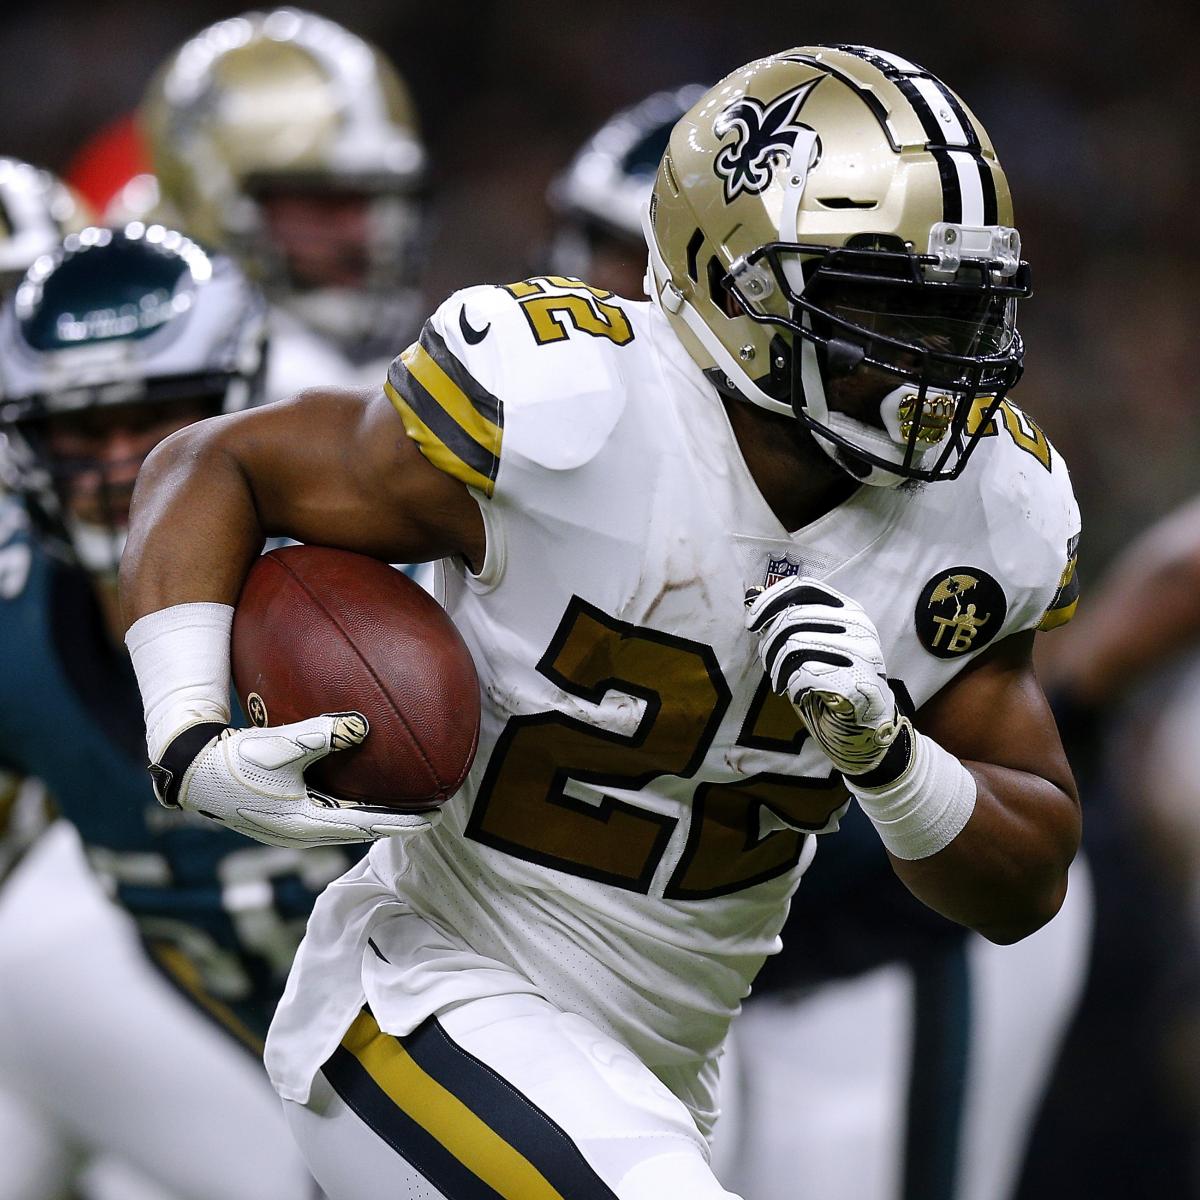 Saints RB Mark Ingram Dominates on the Field, Goes Hard When the Mask